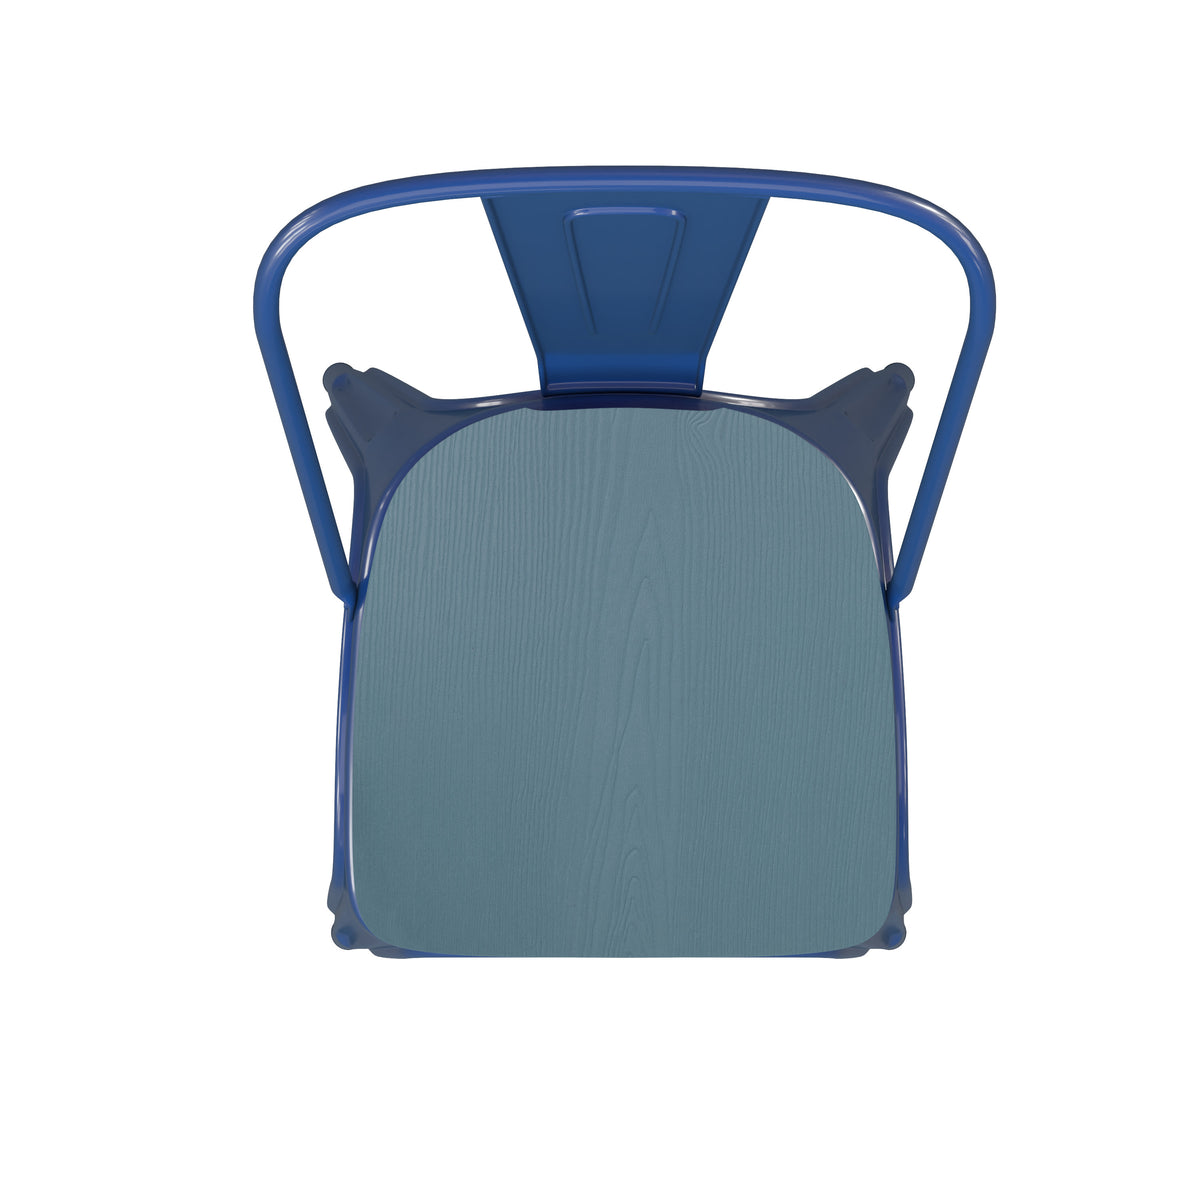 Blue/Teal-Blue |#| All-Weather Commercial Stack Chair & Poly Resin Seat - Blue/Teal-Blue